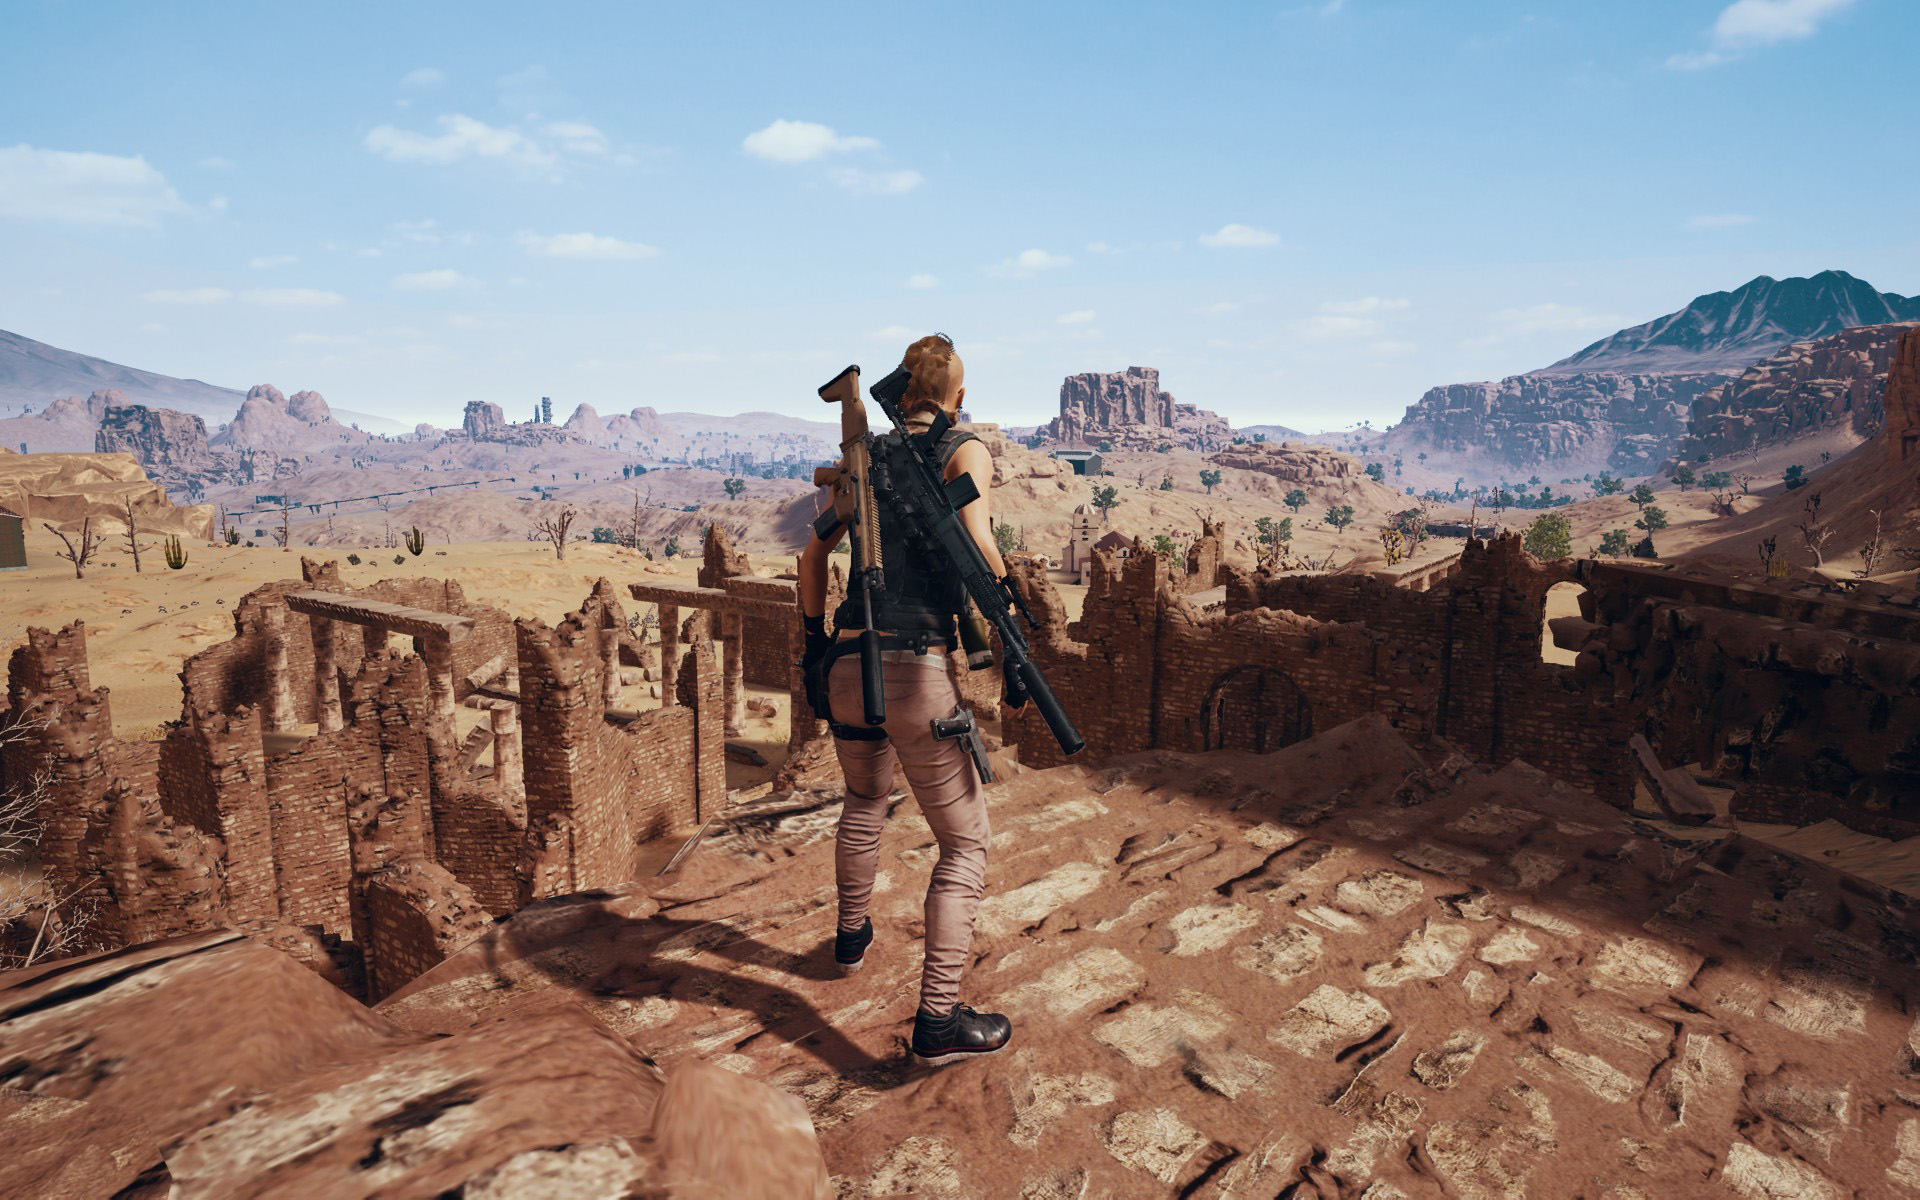 In 2018, PUBG Developer’s Priority Is A ‘Competitive,’ ‘Crash-Free’ Game